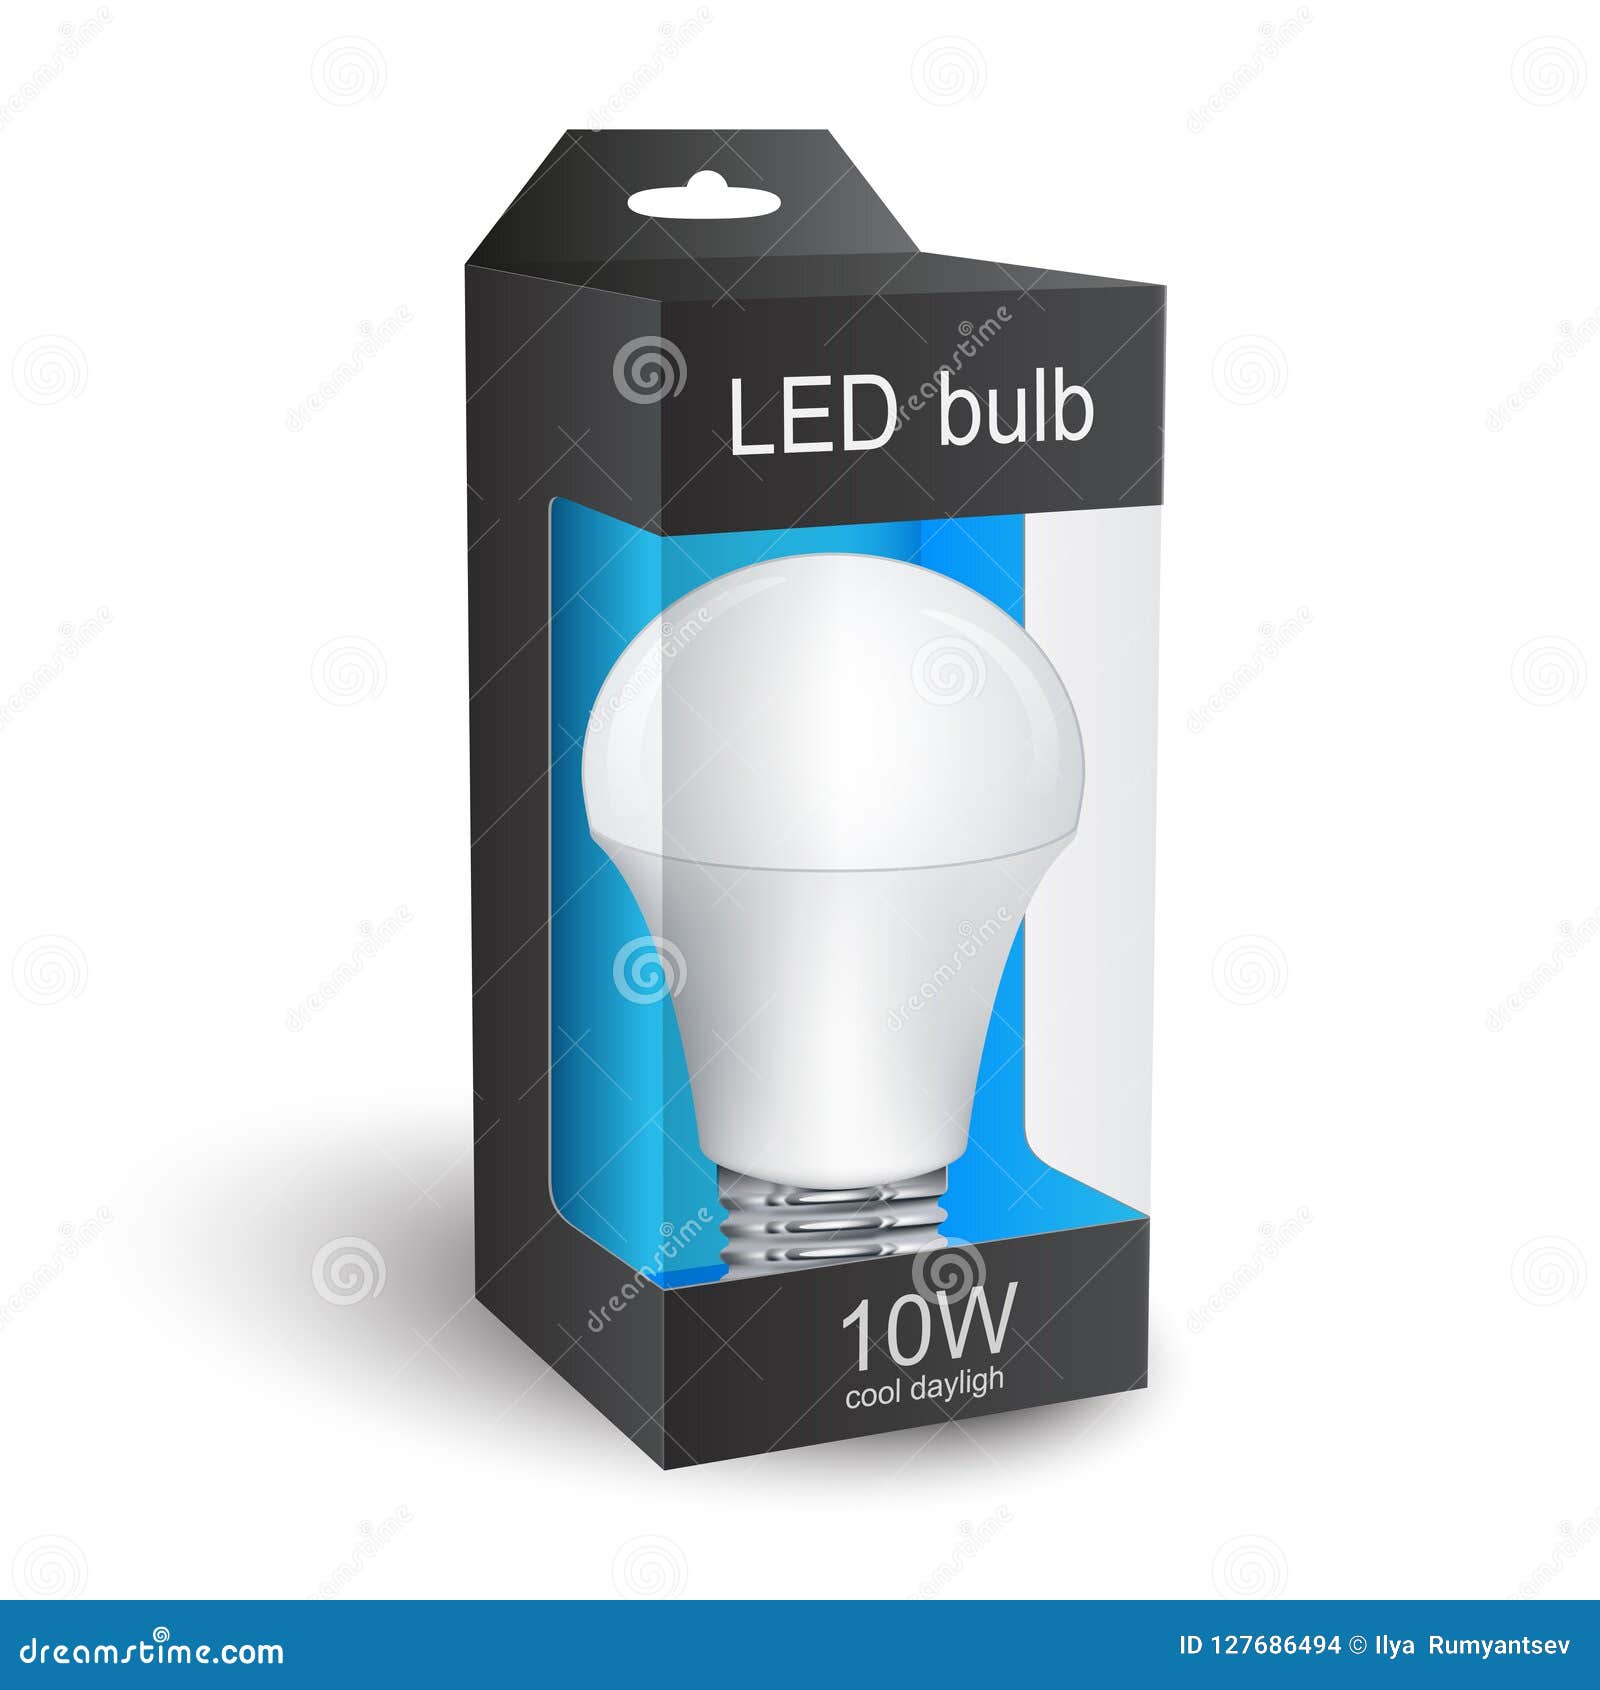 Realistic Led Light Bulb Package Design 3d Vector Stock Vector Illustration Of Background Ecology 127686494